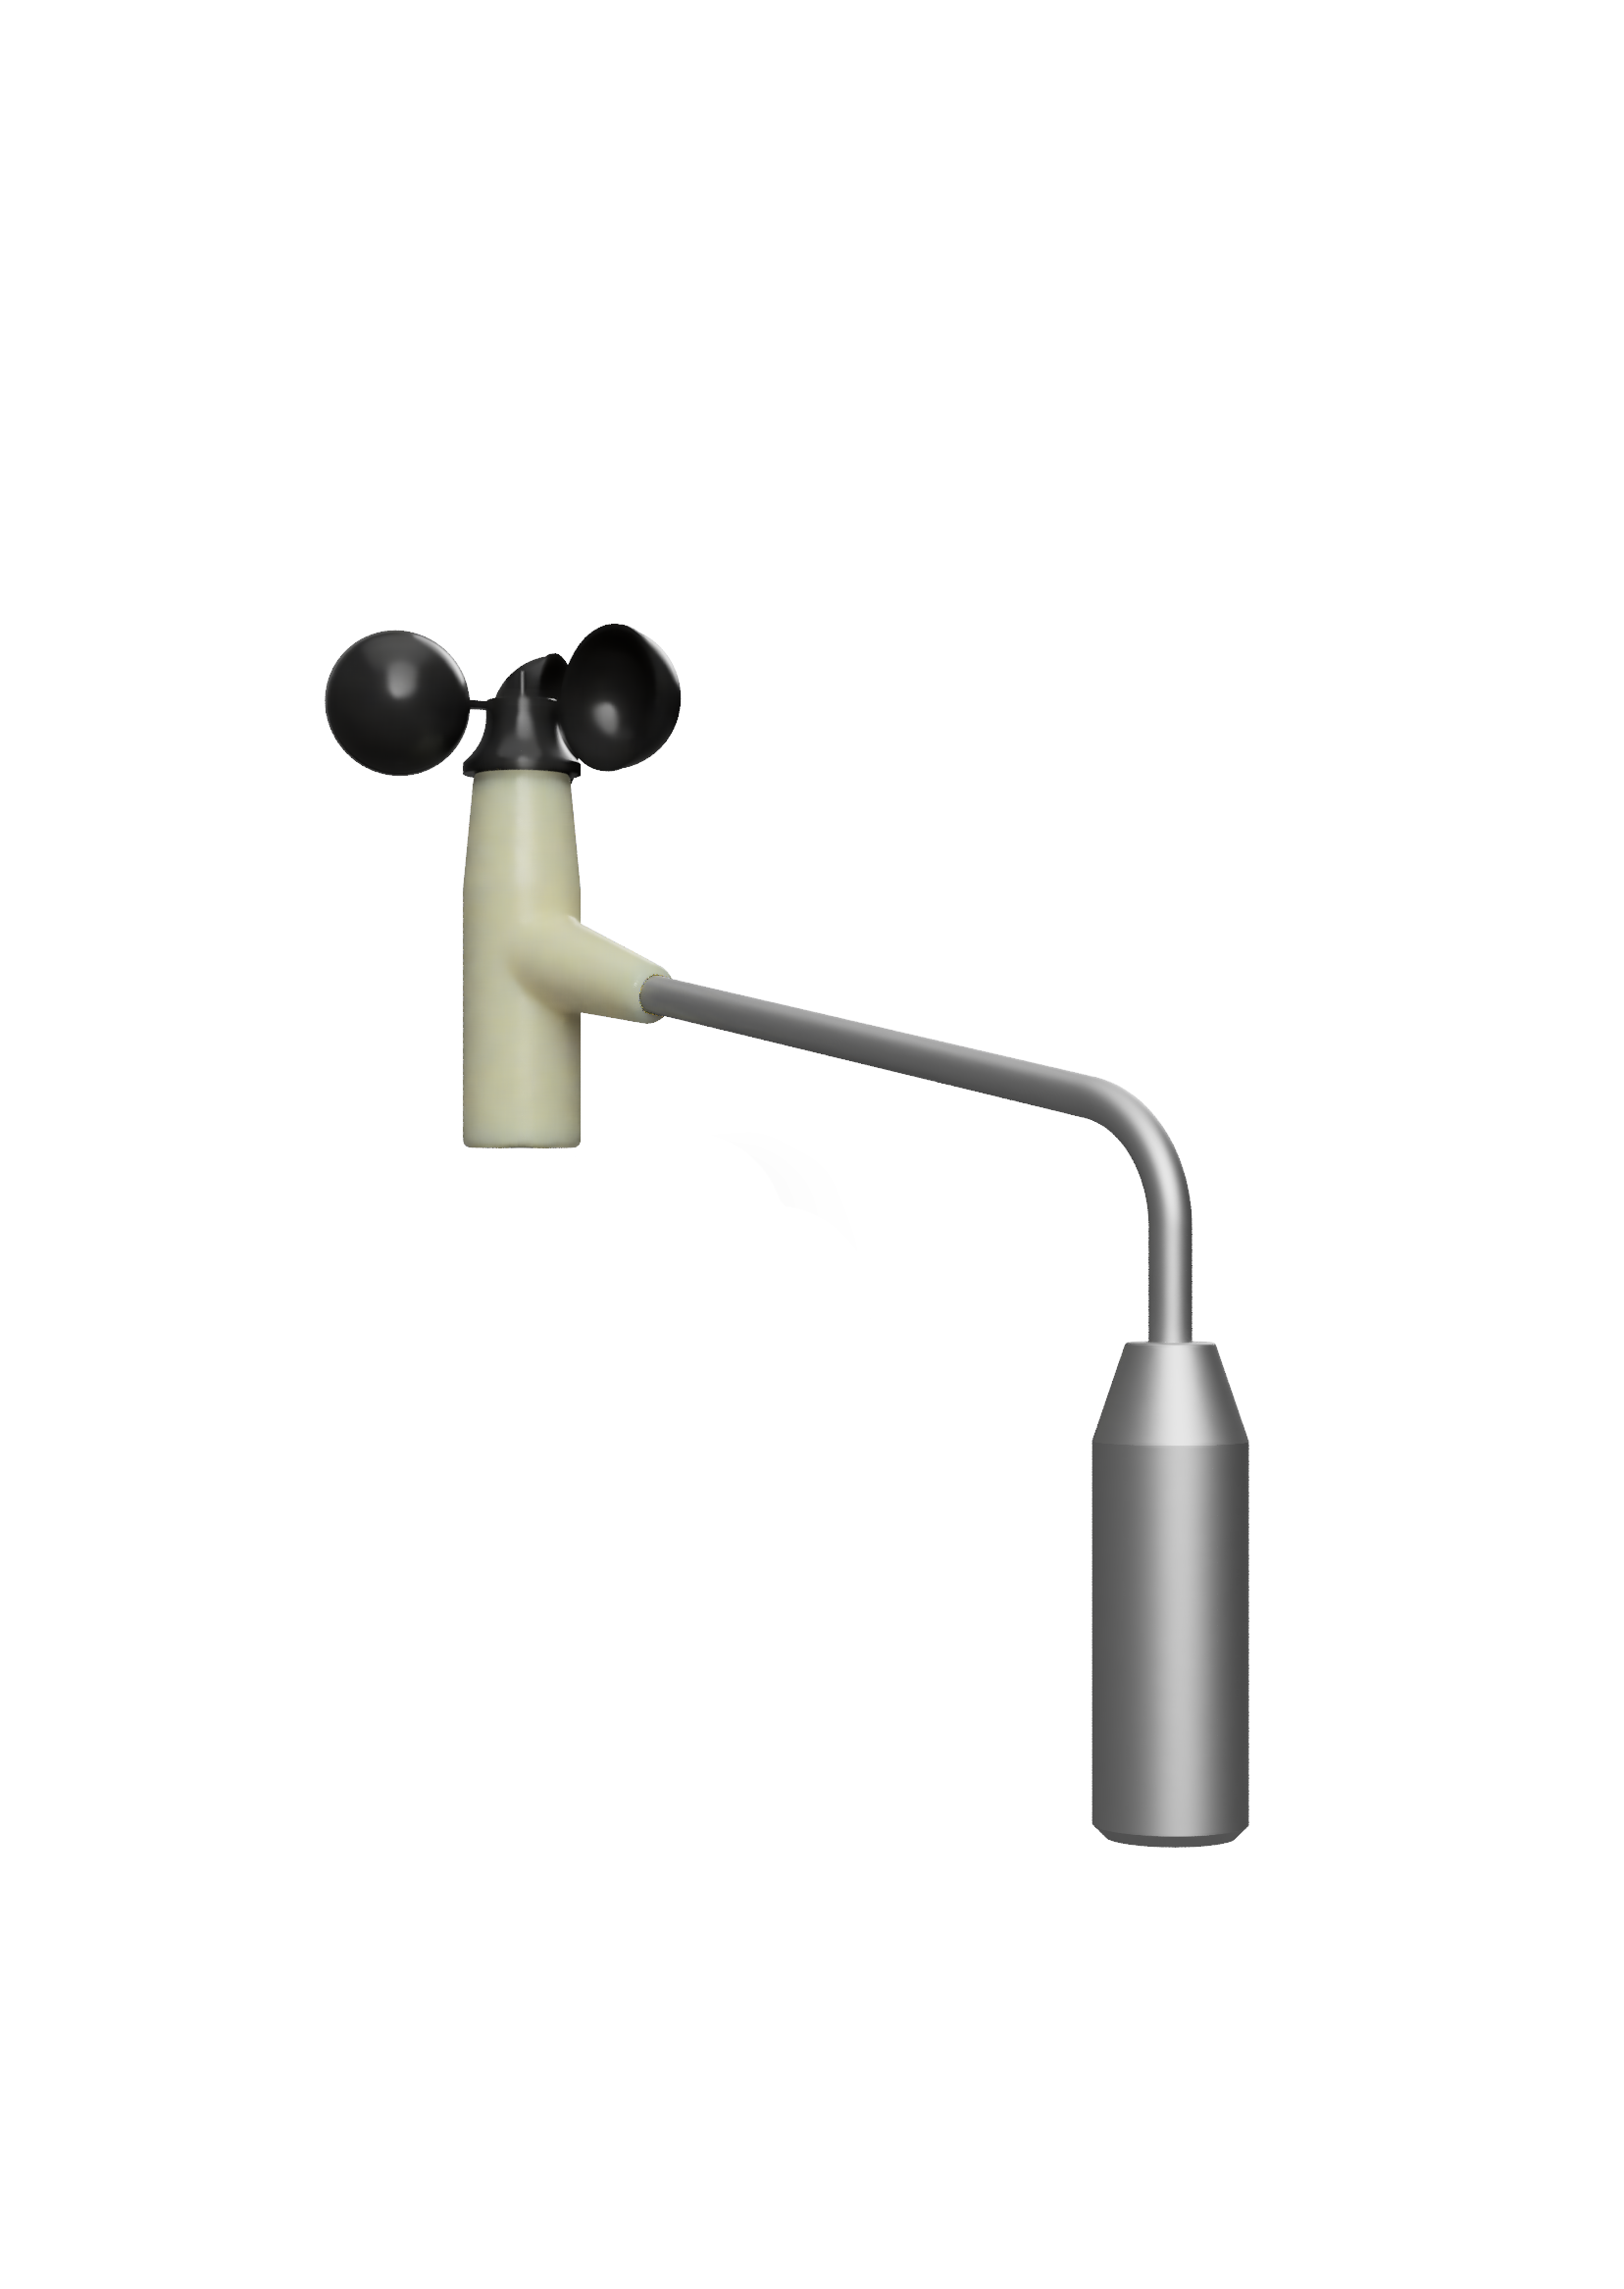 Meteo probe for wind speed with voltage output / 0 - 2.1 V  Type: f.556.2.18